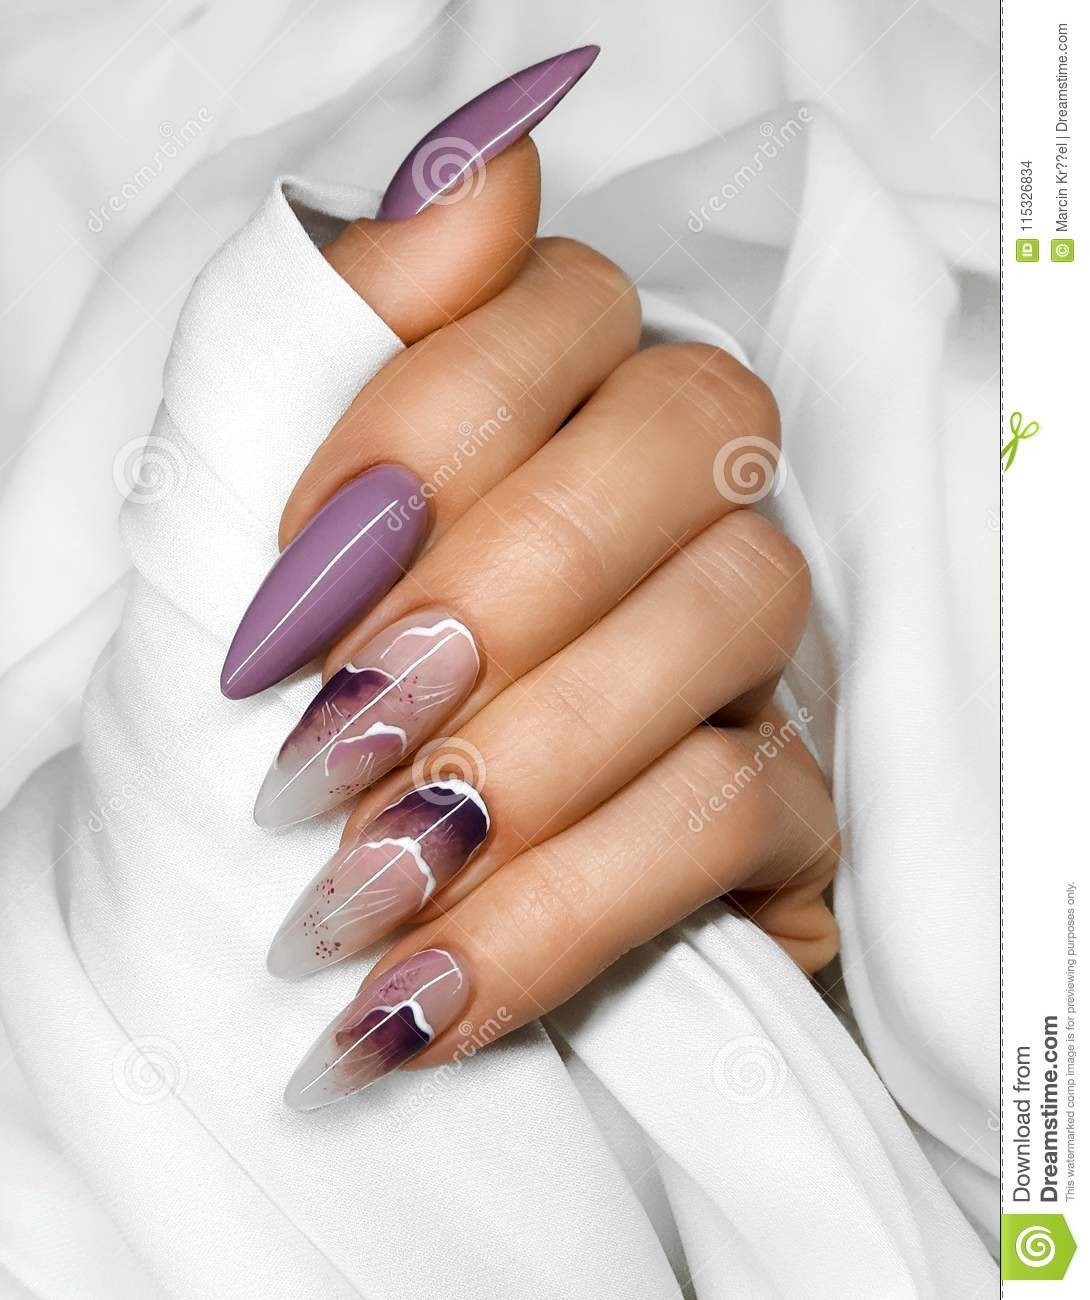 Beautiful Nails Prices
 Female Hands With Beautiful Colorful Hybrid Nails And